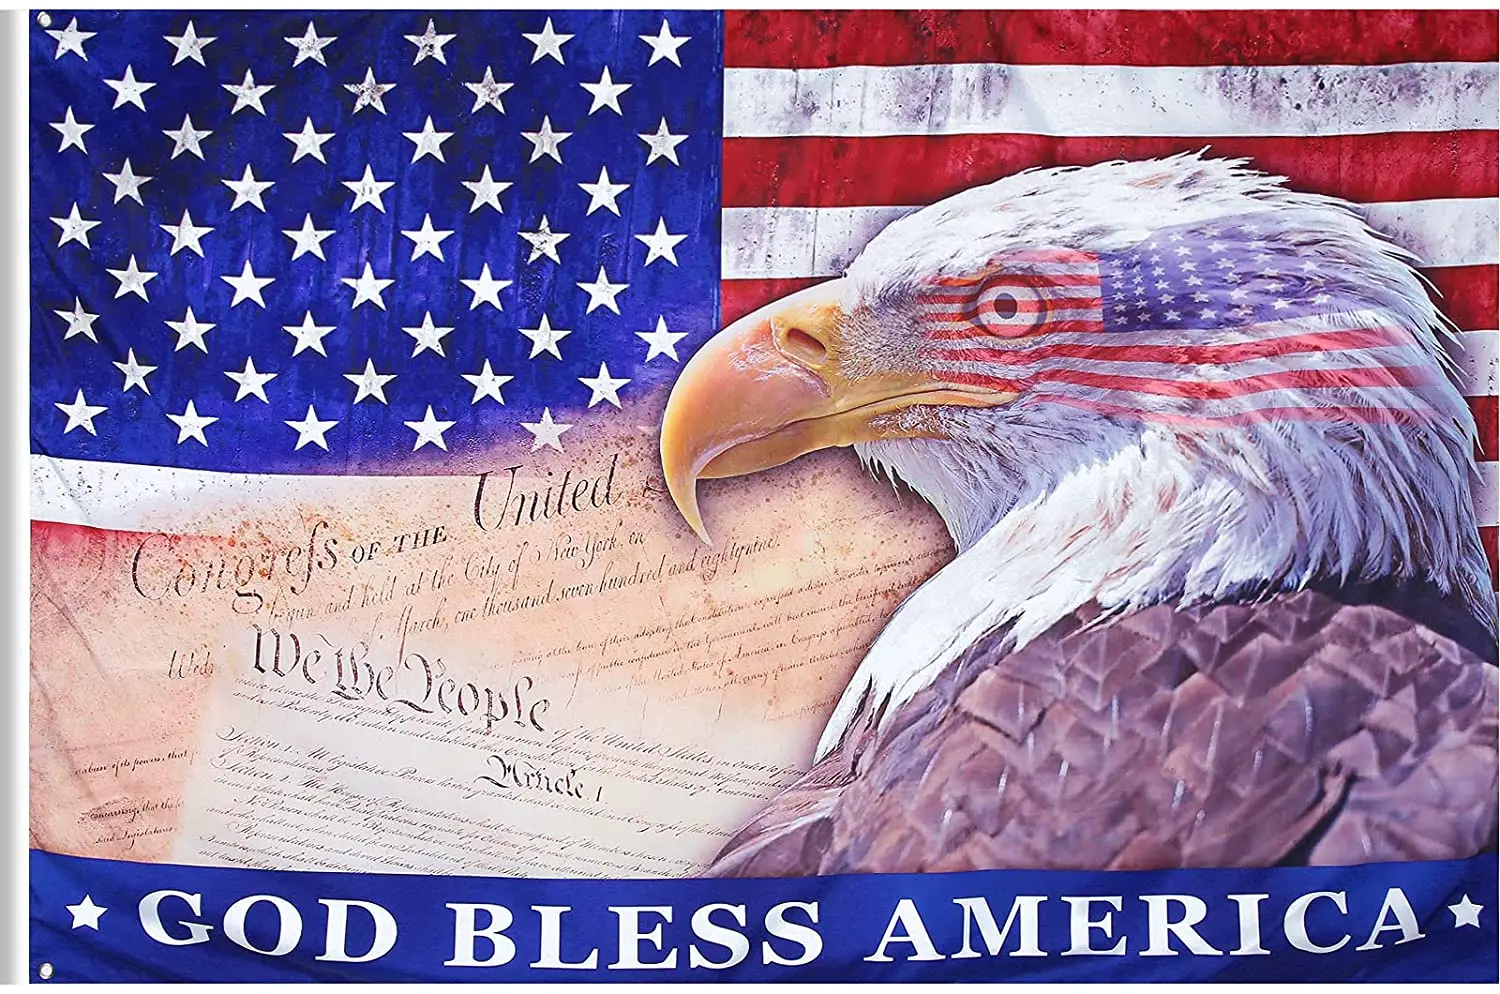 Bald Eagle American Flag 3x5 Feet, with Brass Grommet Double